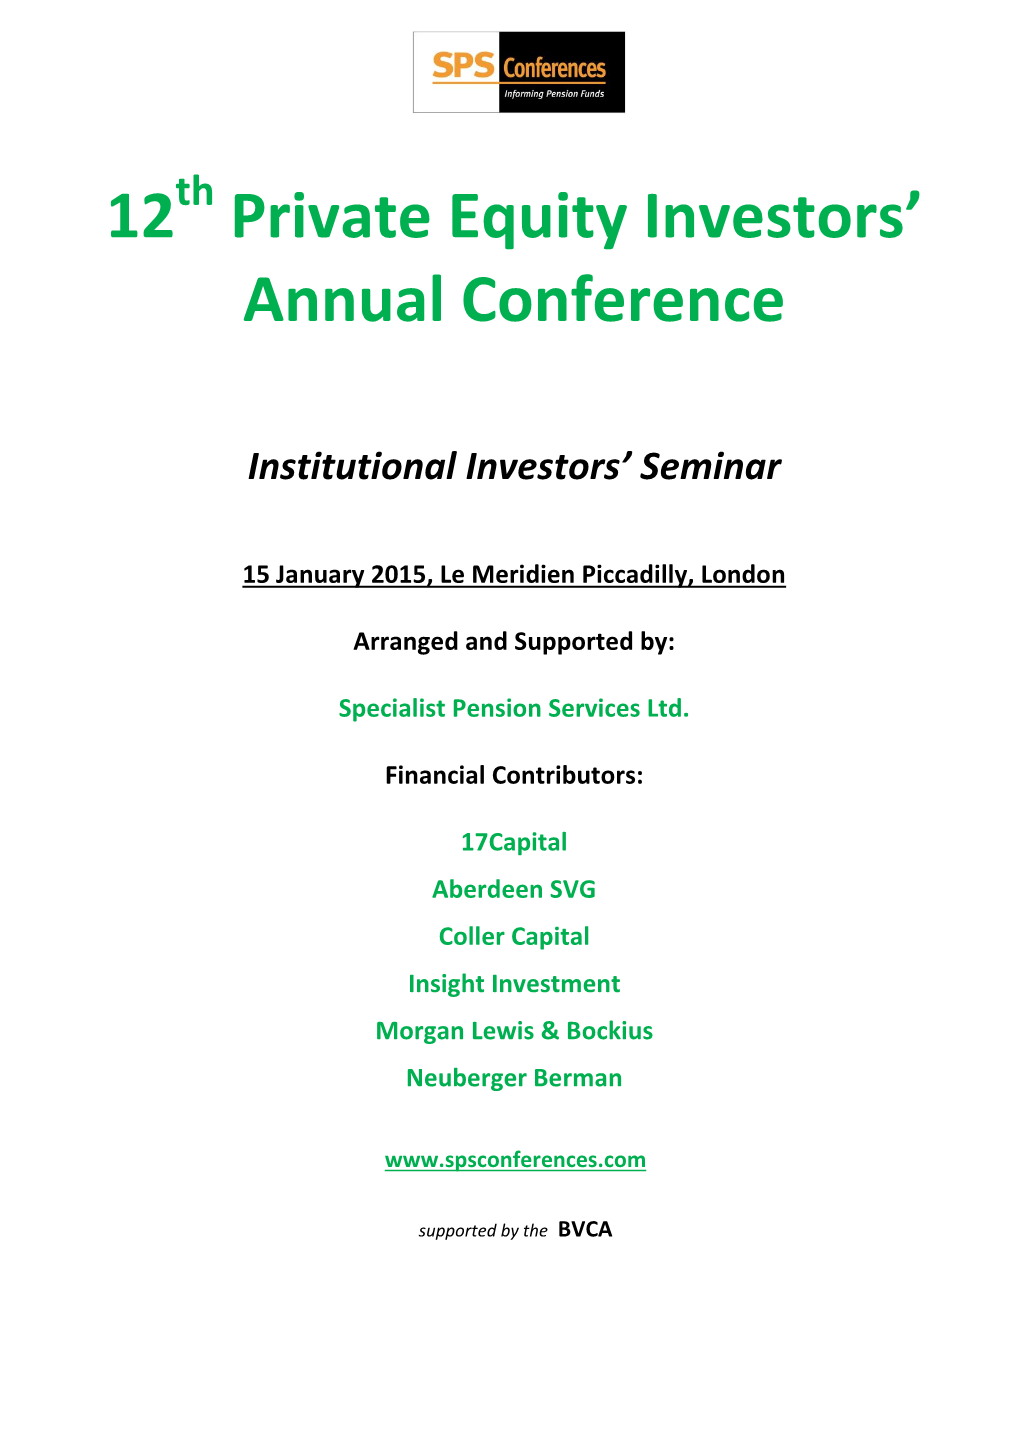 Private Equity Investors' Annual Conference